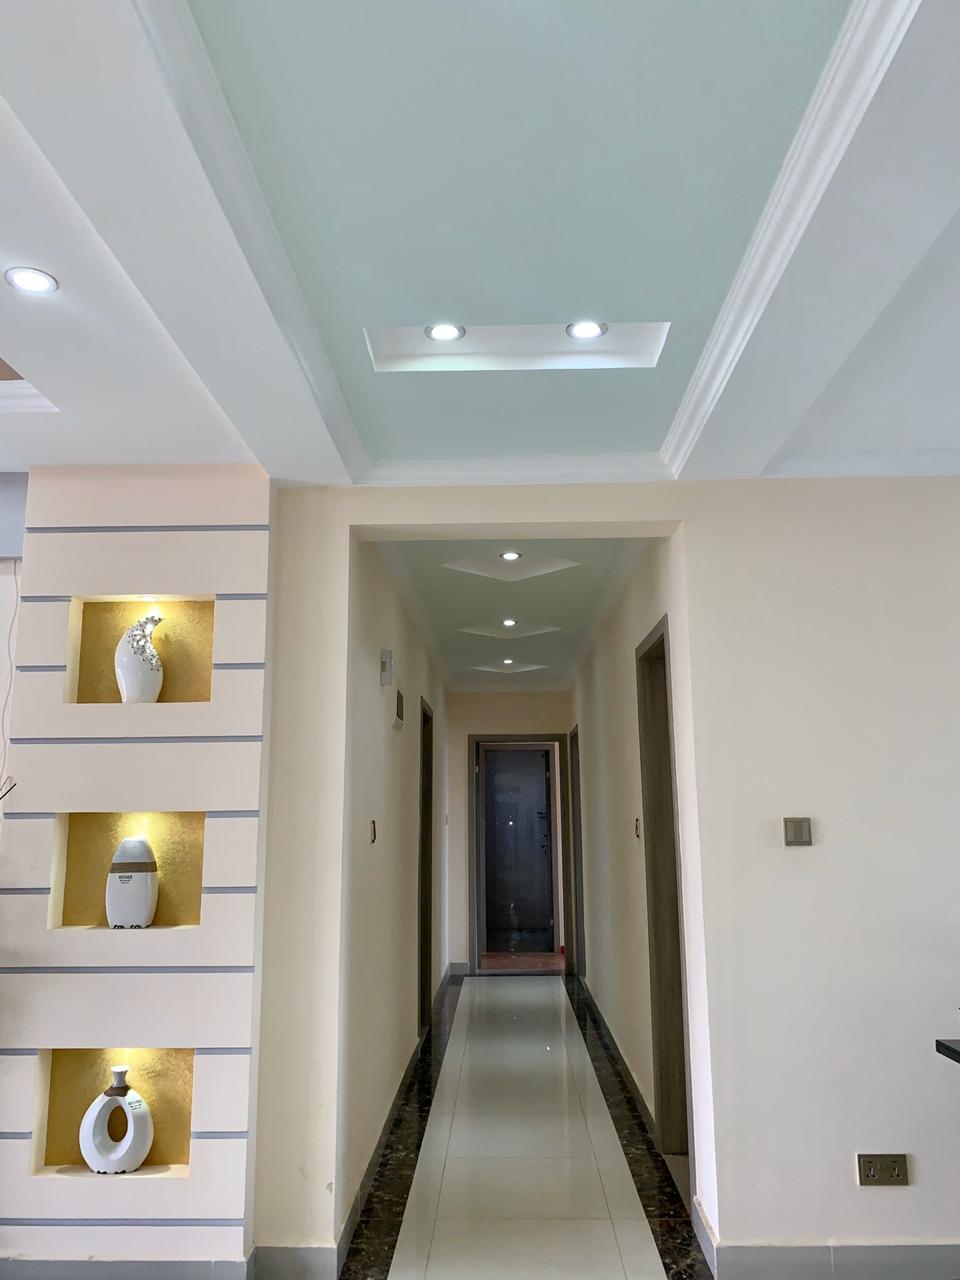 3 Bedroom apartments located in Kilimani, Denis Pritt Road. 3 bedroom (140Sqm) 15M. Has 24-hour standby generator, Children’s Play ground. Musilli Homes